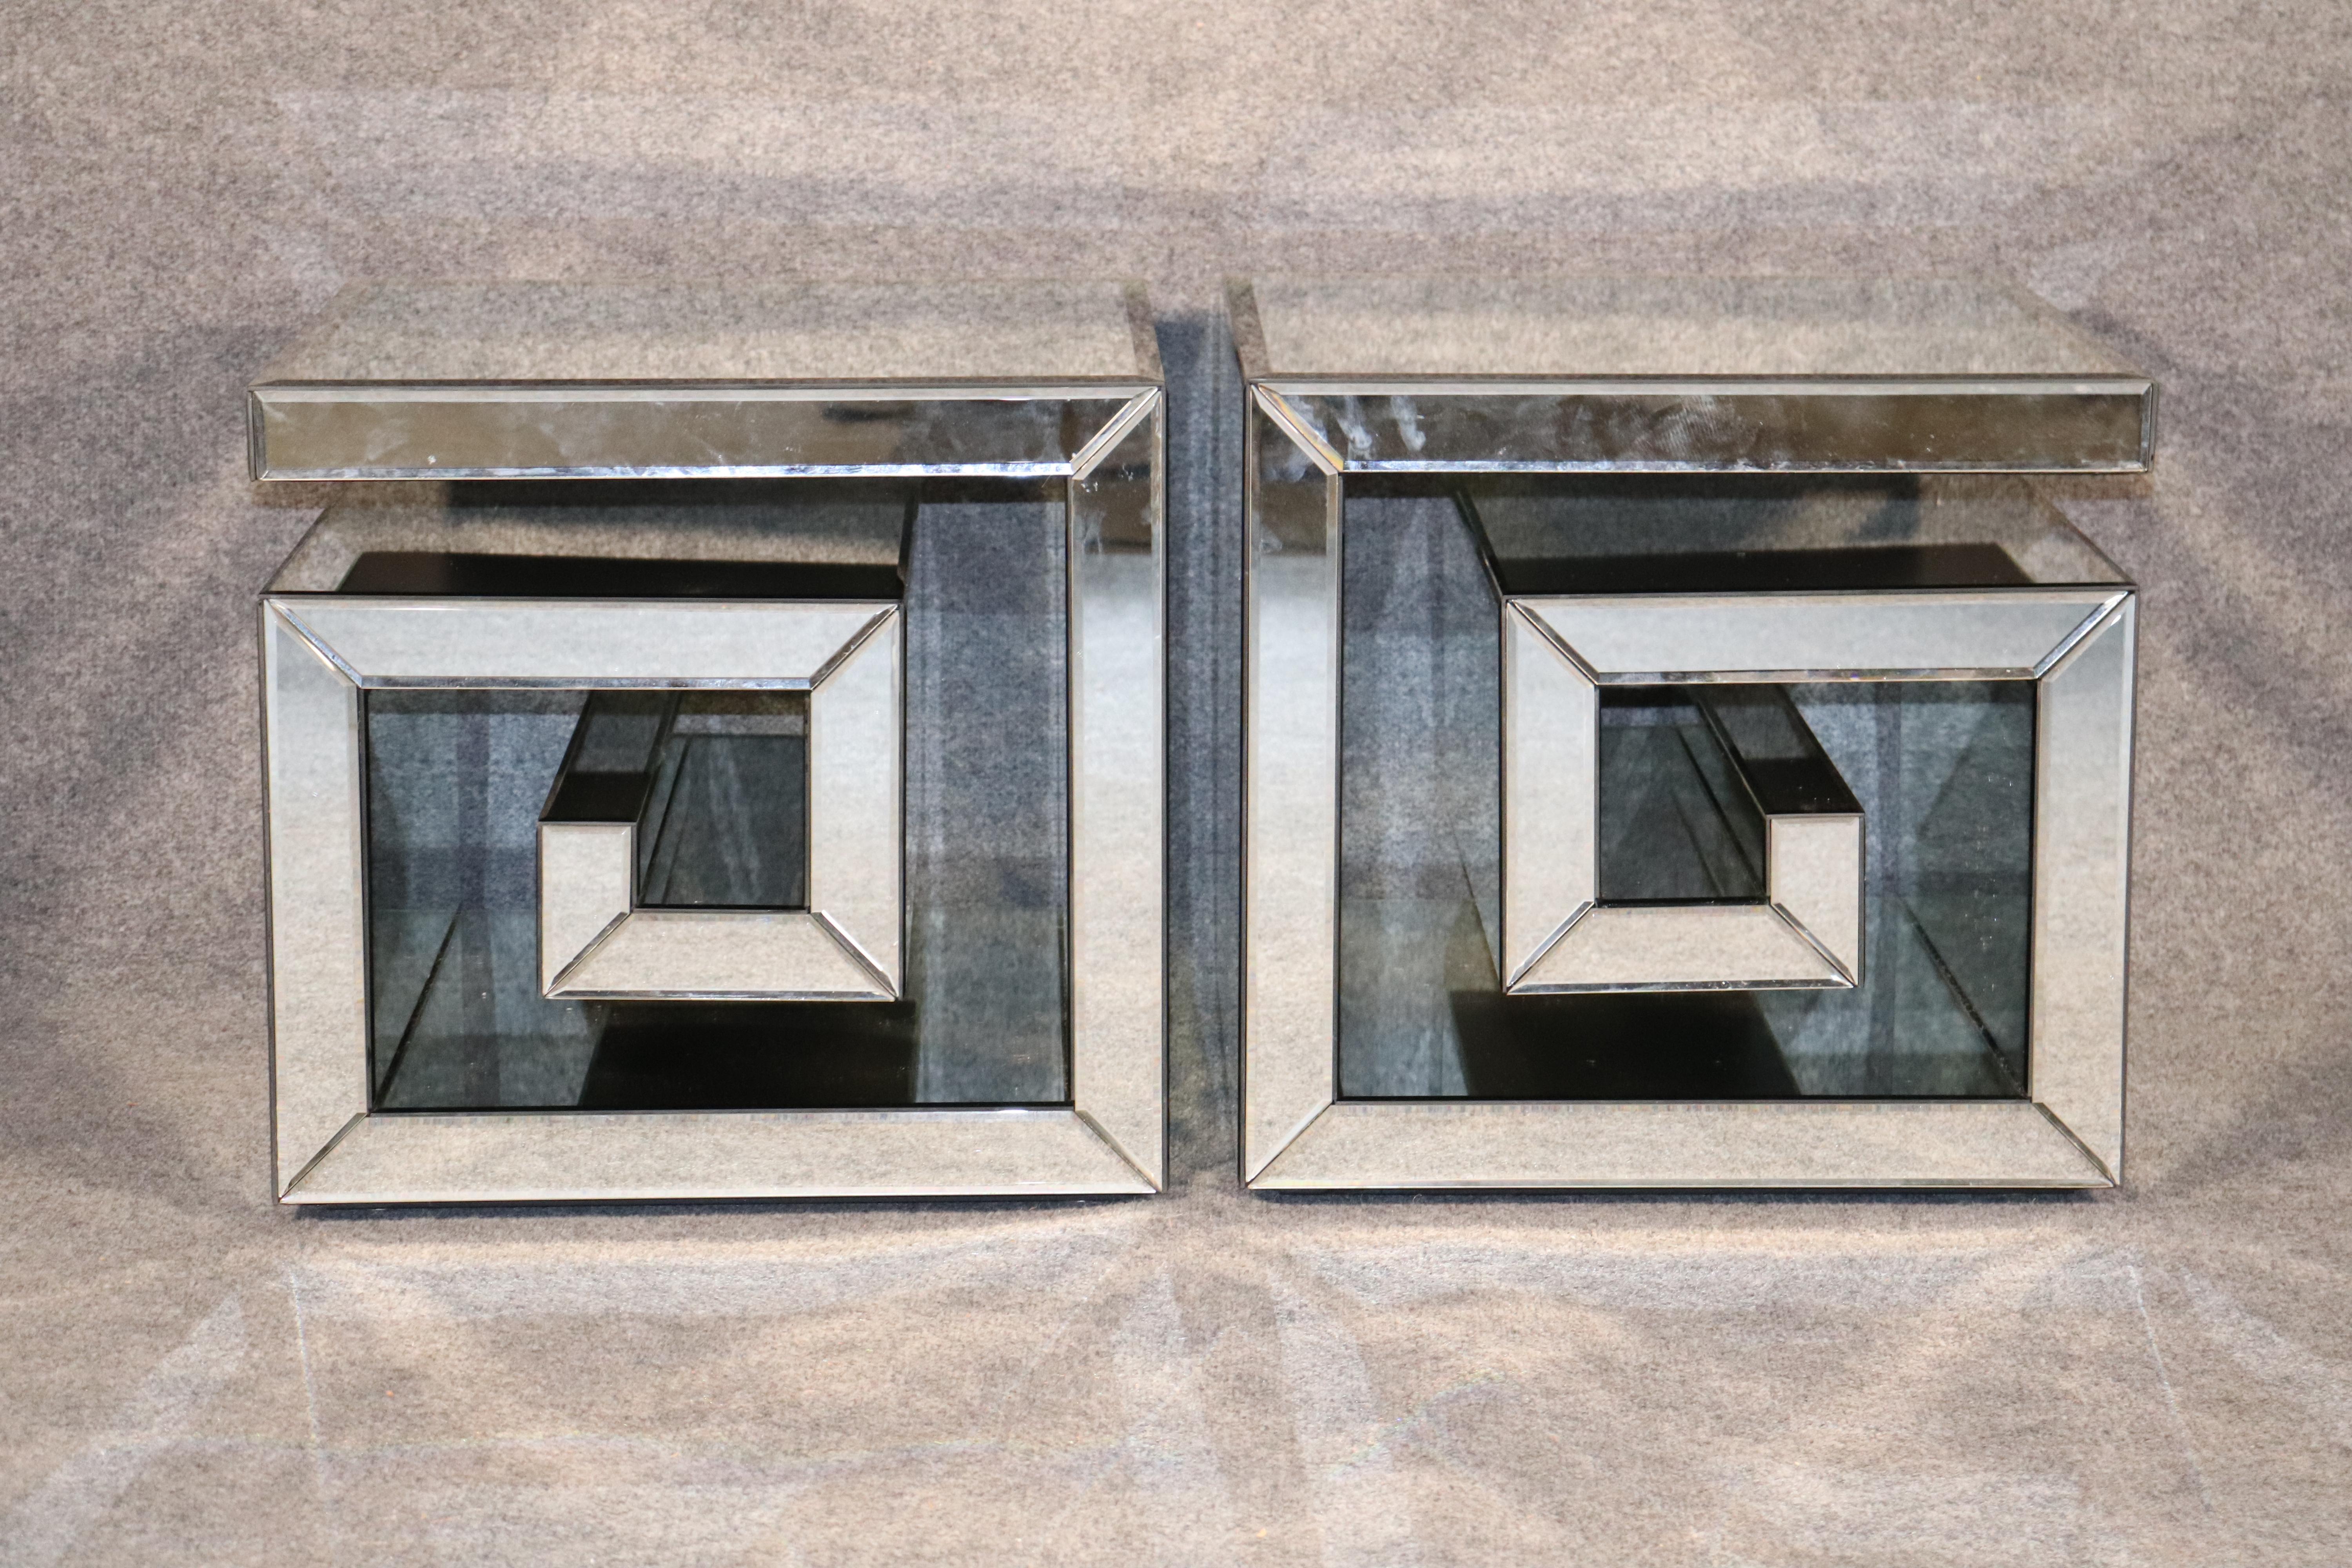 Pair of mirrored stands with spiral Greek key style form. Made with beveled mirrored glass.
Please confirm location.